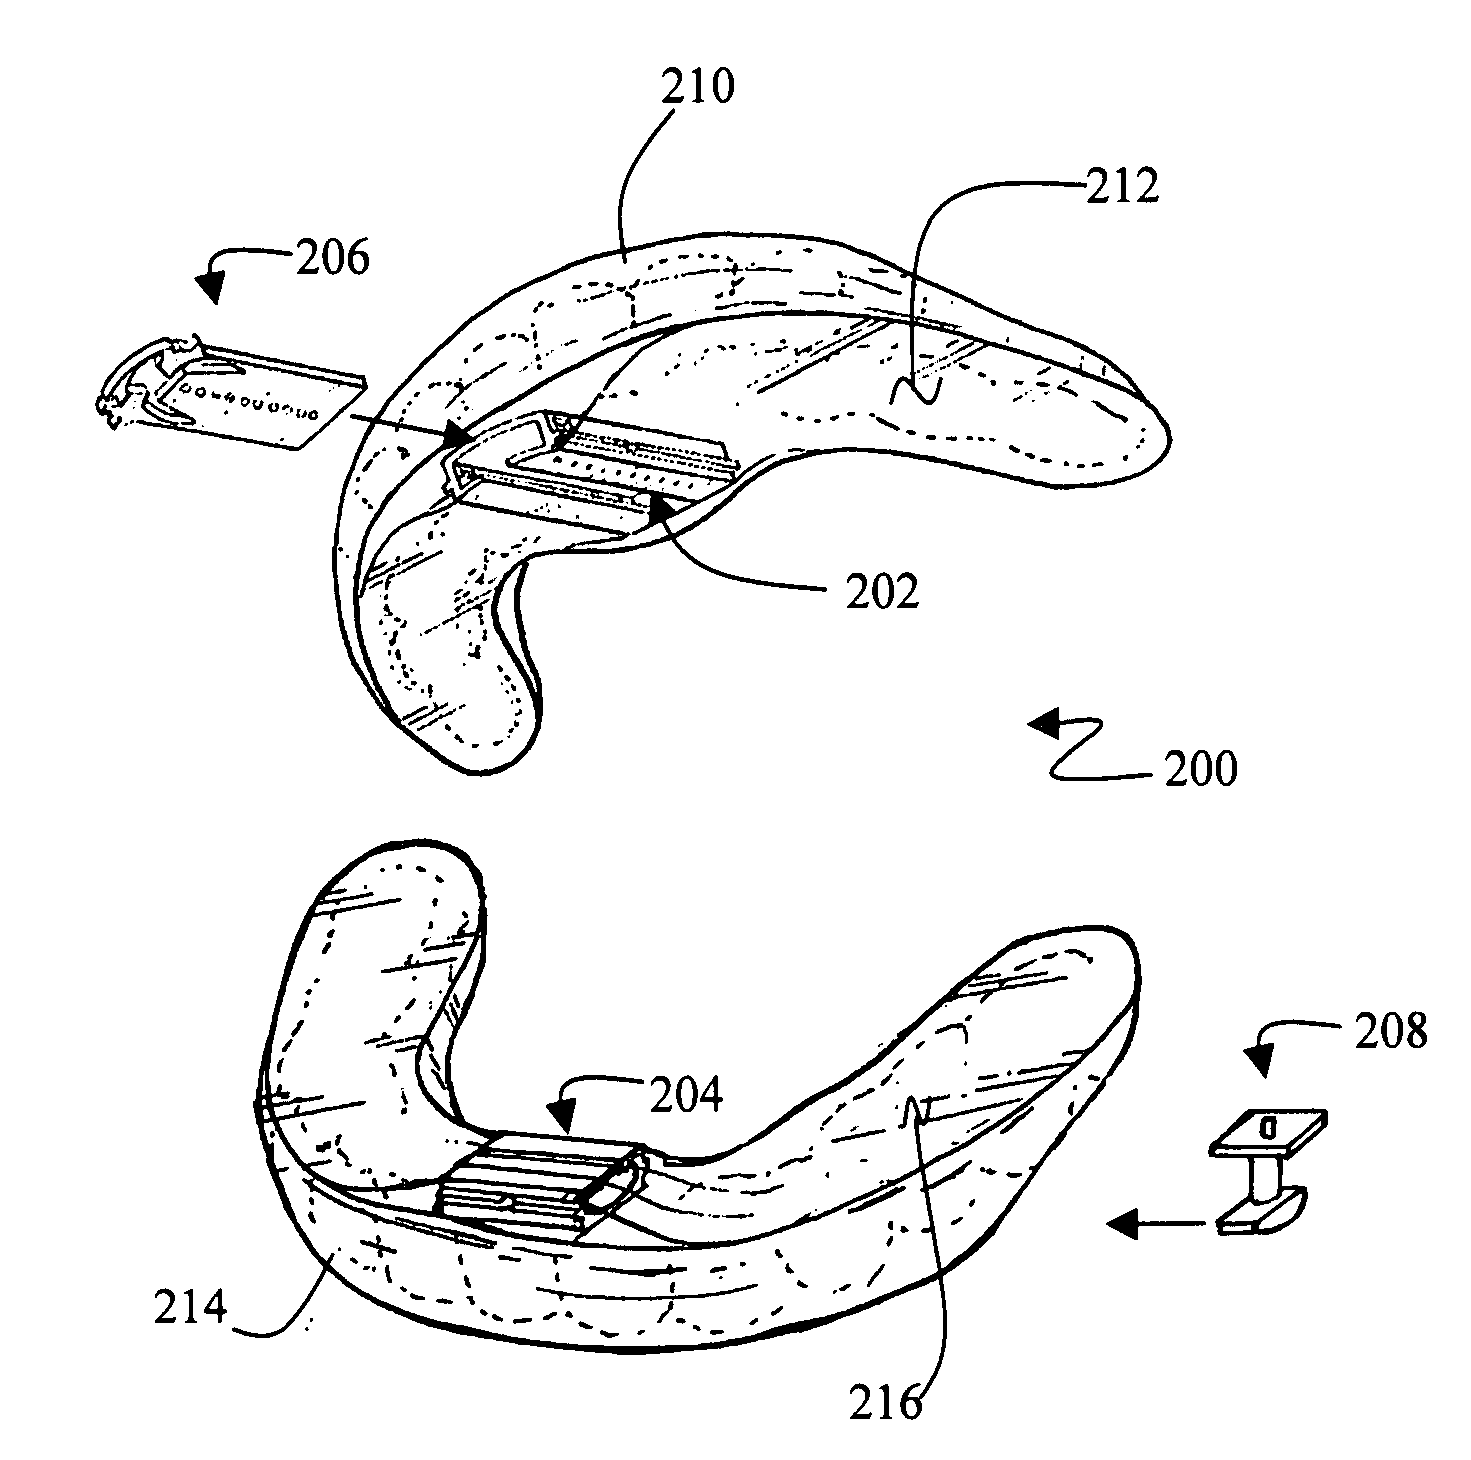 Apparatus and method for caring for obstructive sleep disorder breathing